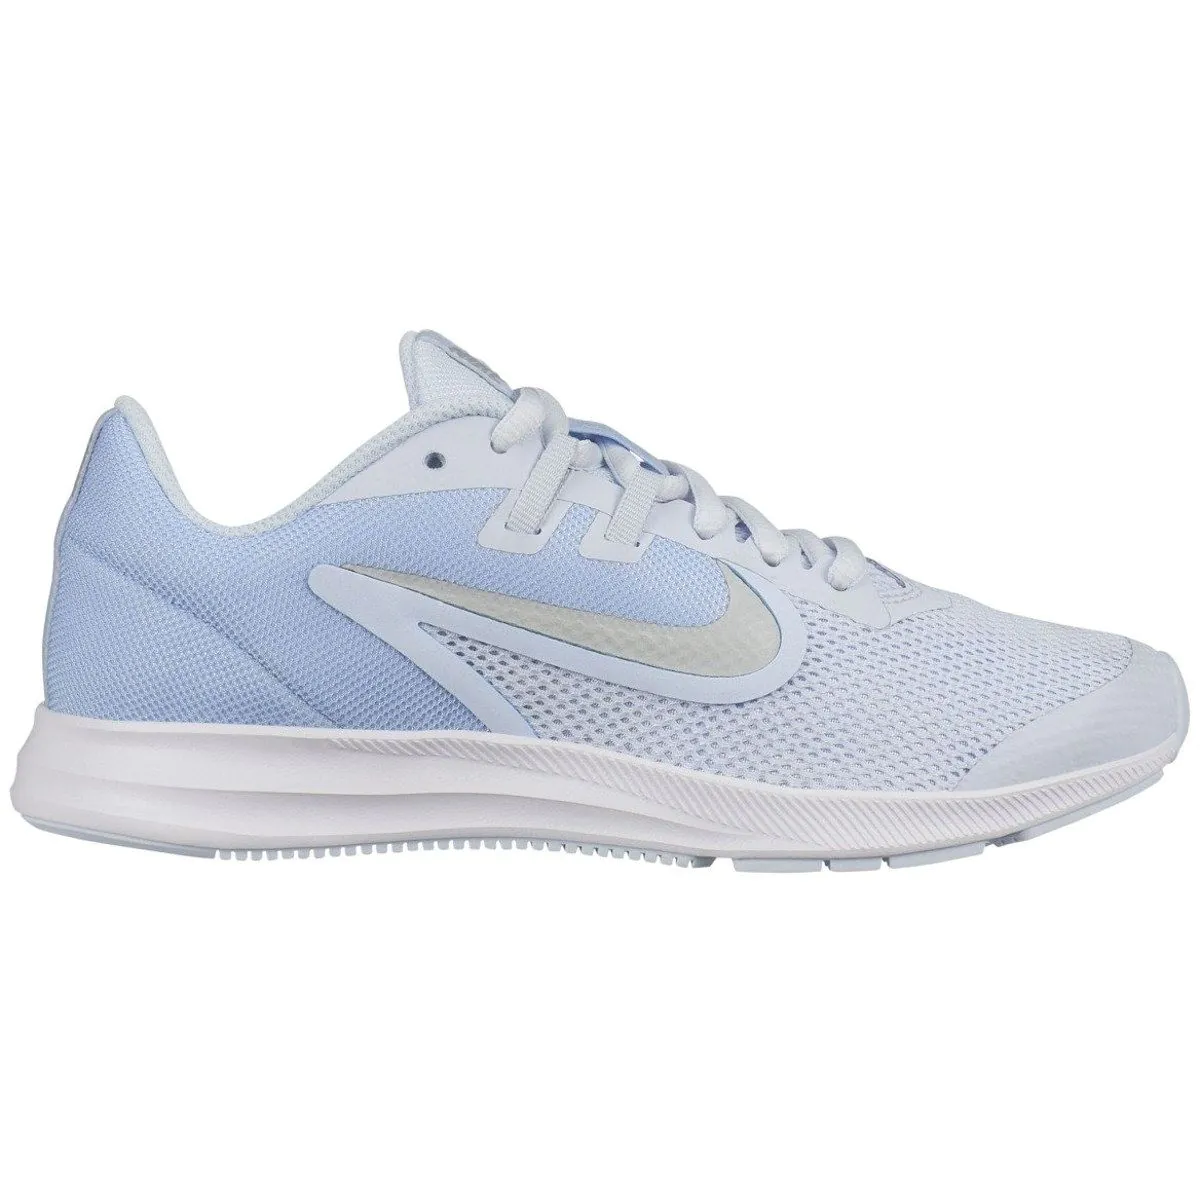 Nike Downshifter 9 Shoes AR4135-401